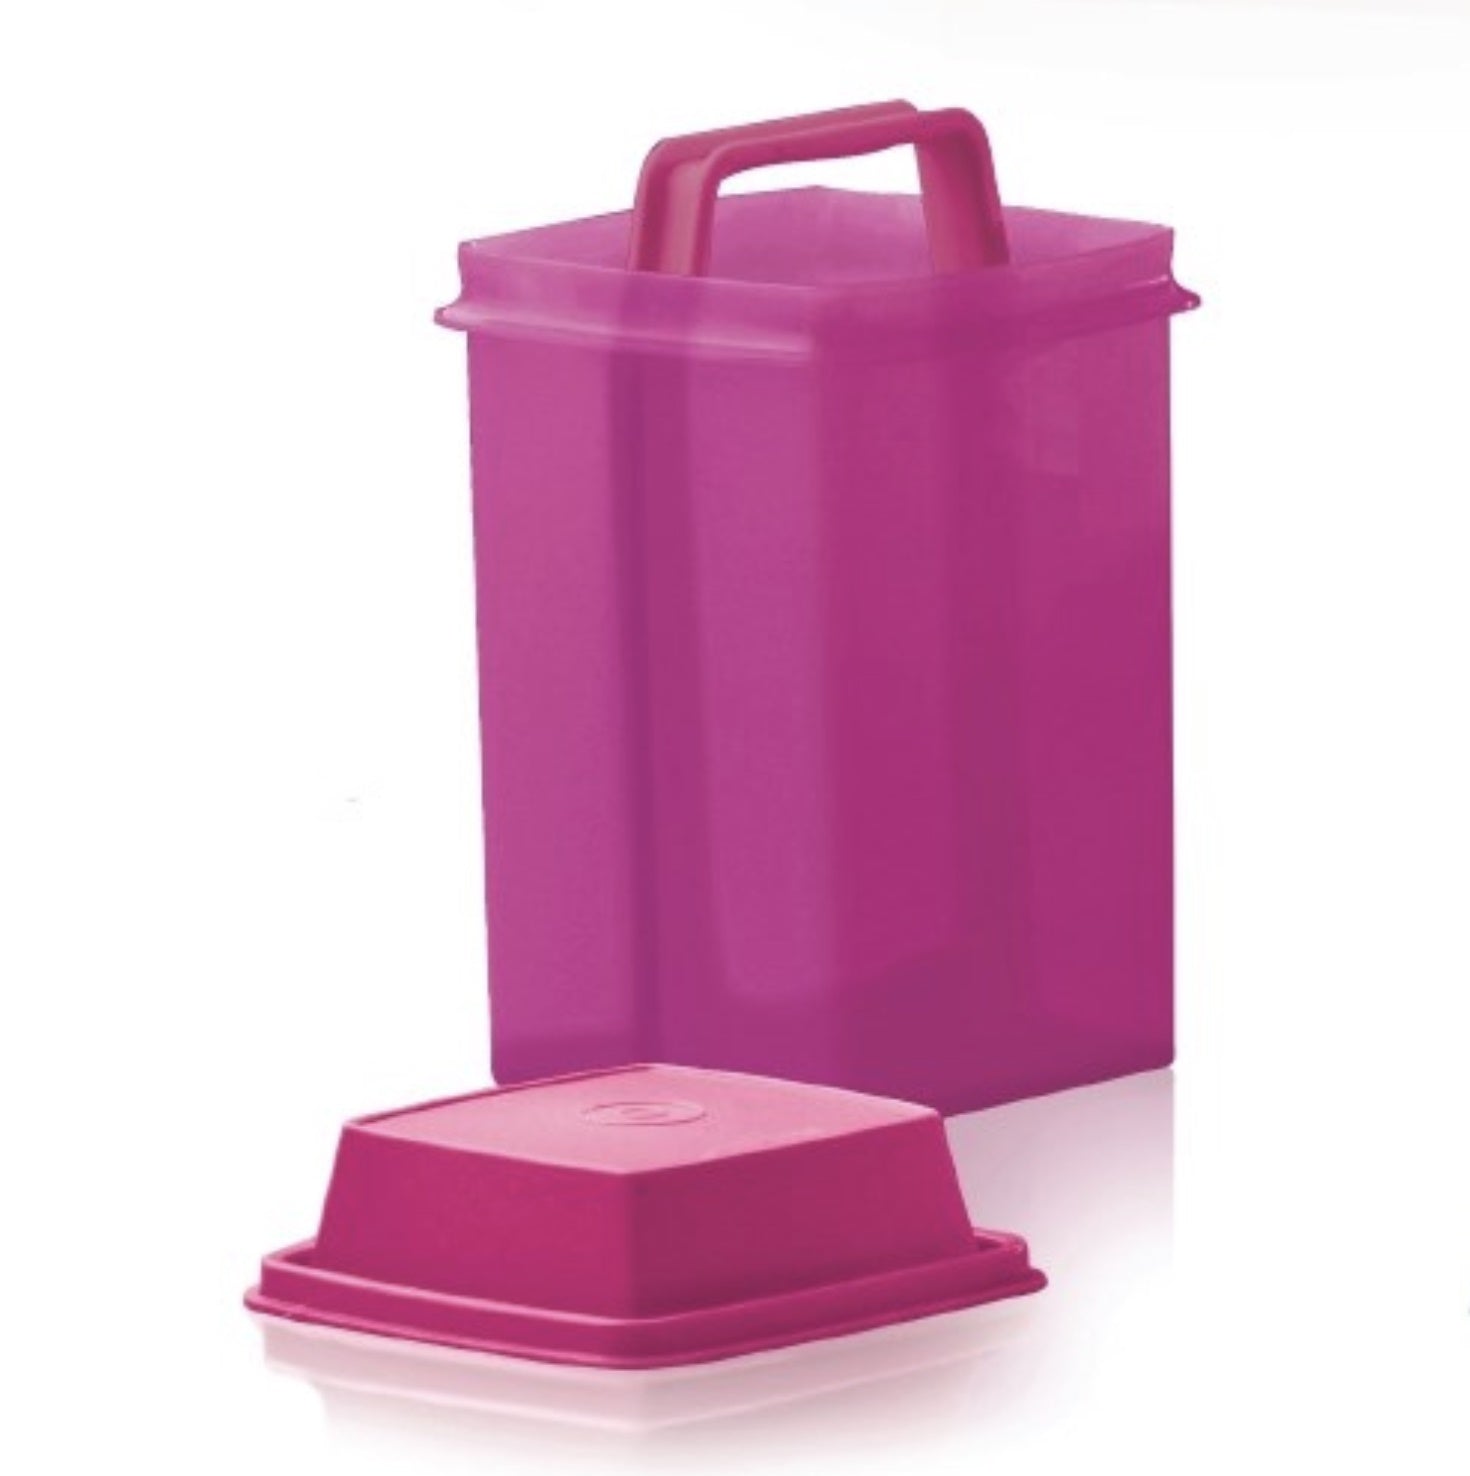 TUPPERWARE 3-Pc SMALL Pick-A-Deli 5-cup Refrigerator Pickle Celery Container Strainer PINK - Plastic Glass and Wax